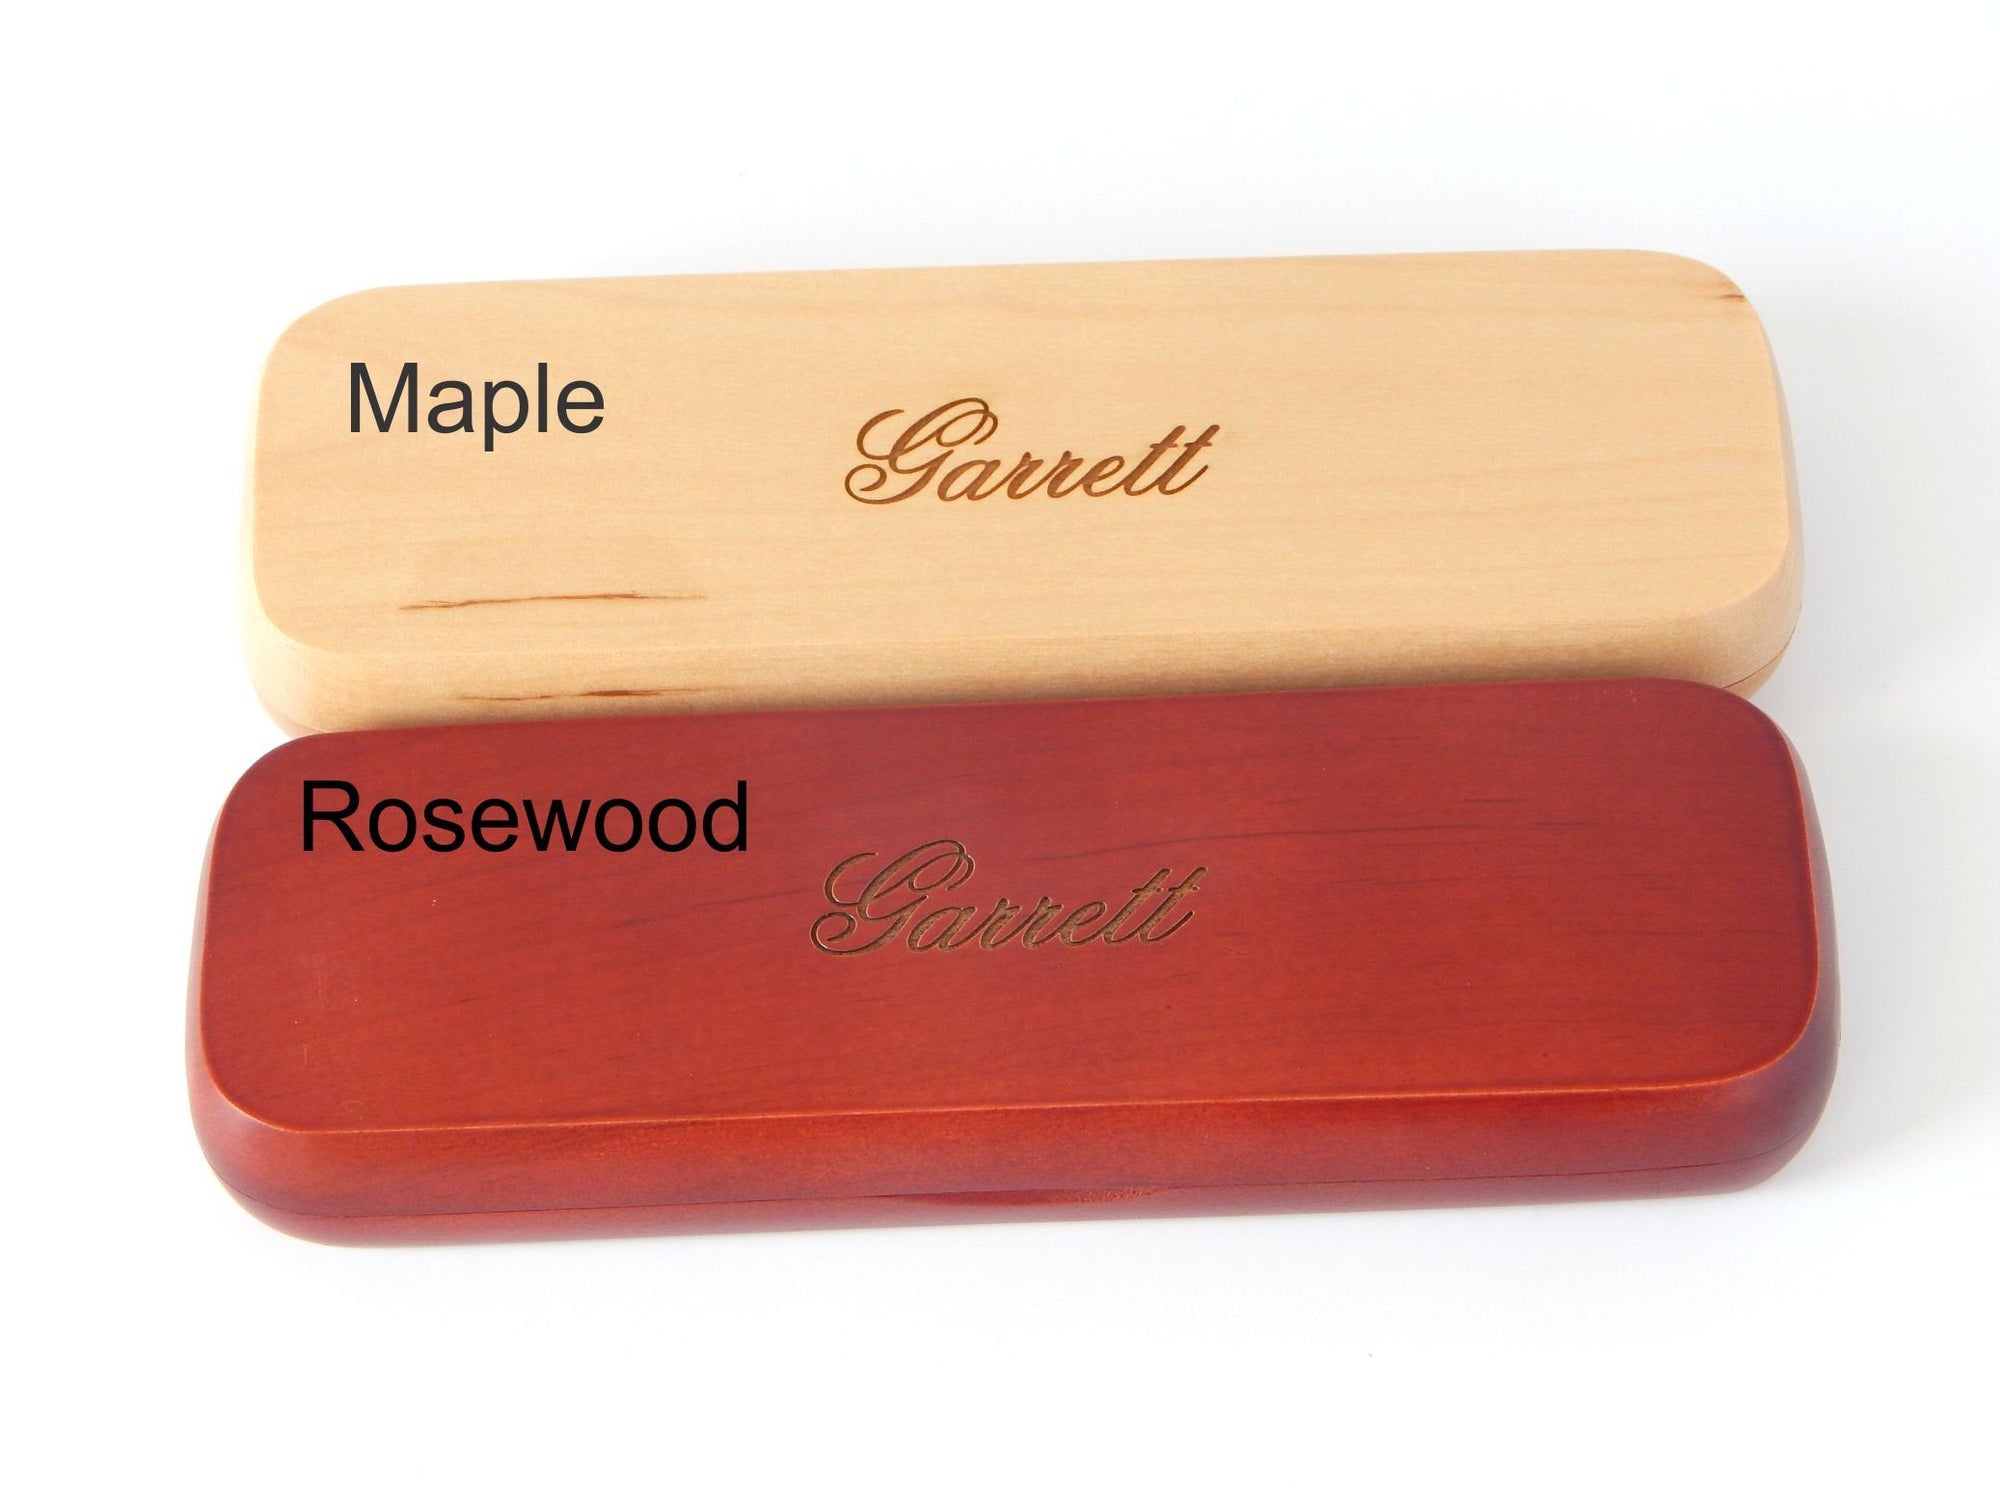 Best Grandpa Ever Gift - Wedding Gifts for Him from Groom and Bride - Personalized Wooden Pen